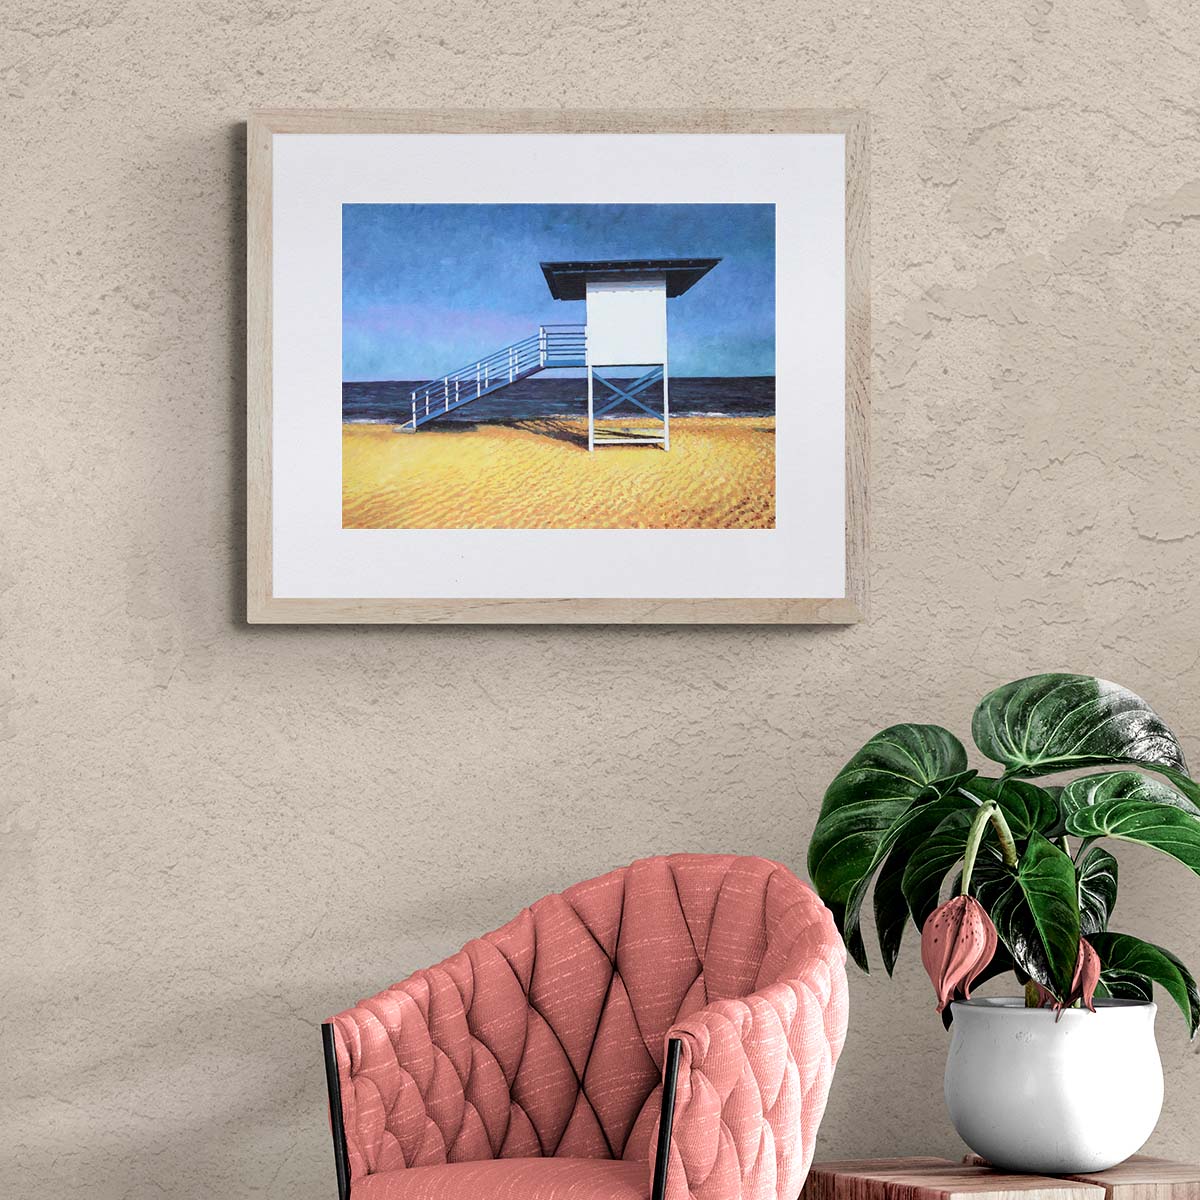 Fine art print of a beach painting of a lifeguard stand, an oil painting by Theo Michael featuring a deserted Cyprus beach